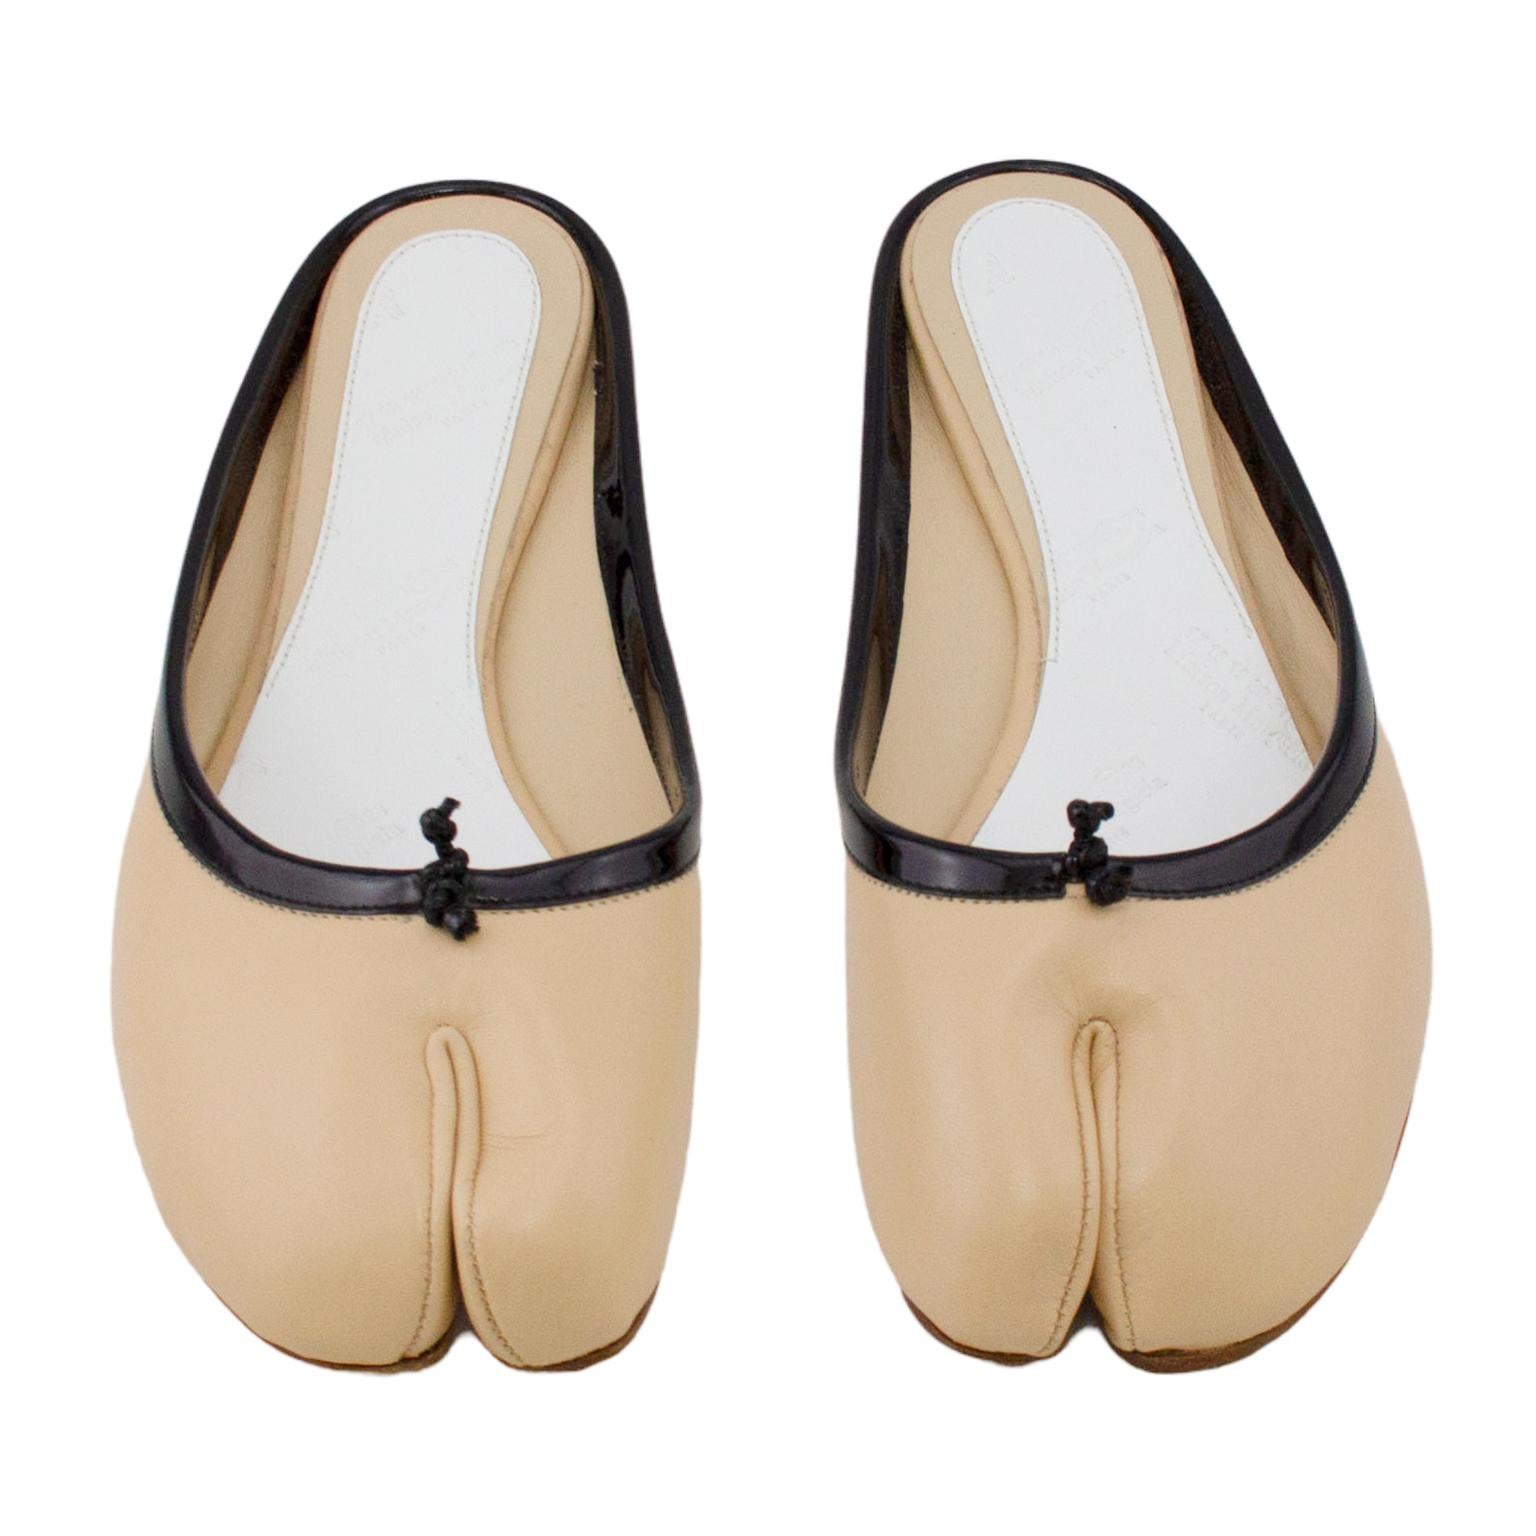 The iconic and hard to find Maison Margiela tabi slide. Supple beige leather with contrasting black patent leather trim. White brand stamped leather insoles with tonal stitching. Excellent vintage condition - very, very slight wear on soles. No box.